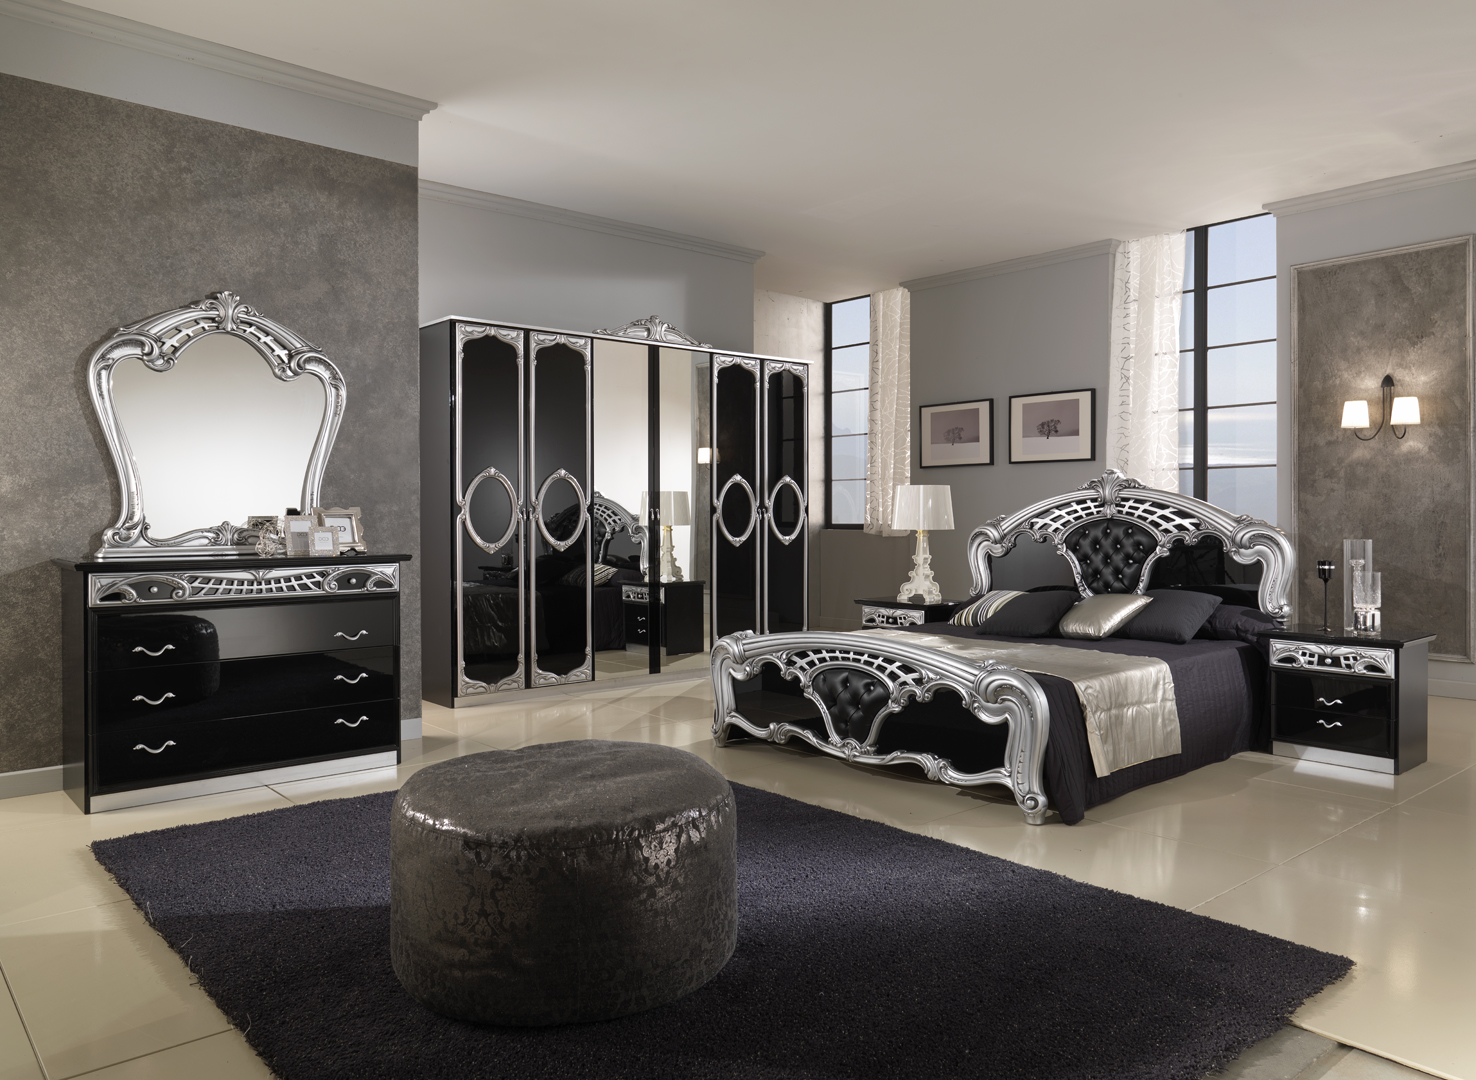 Black Gloss Varnished Vanities Mirrored Bedroom Furniture Added Wardrobe As Well As King Bed Frame Also Wall Lights Fixtures In Luxury Victorian Bedroom Decors Classic And Elegant Furniture + Accessories